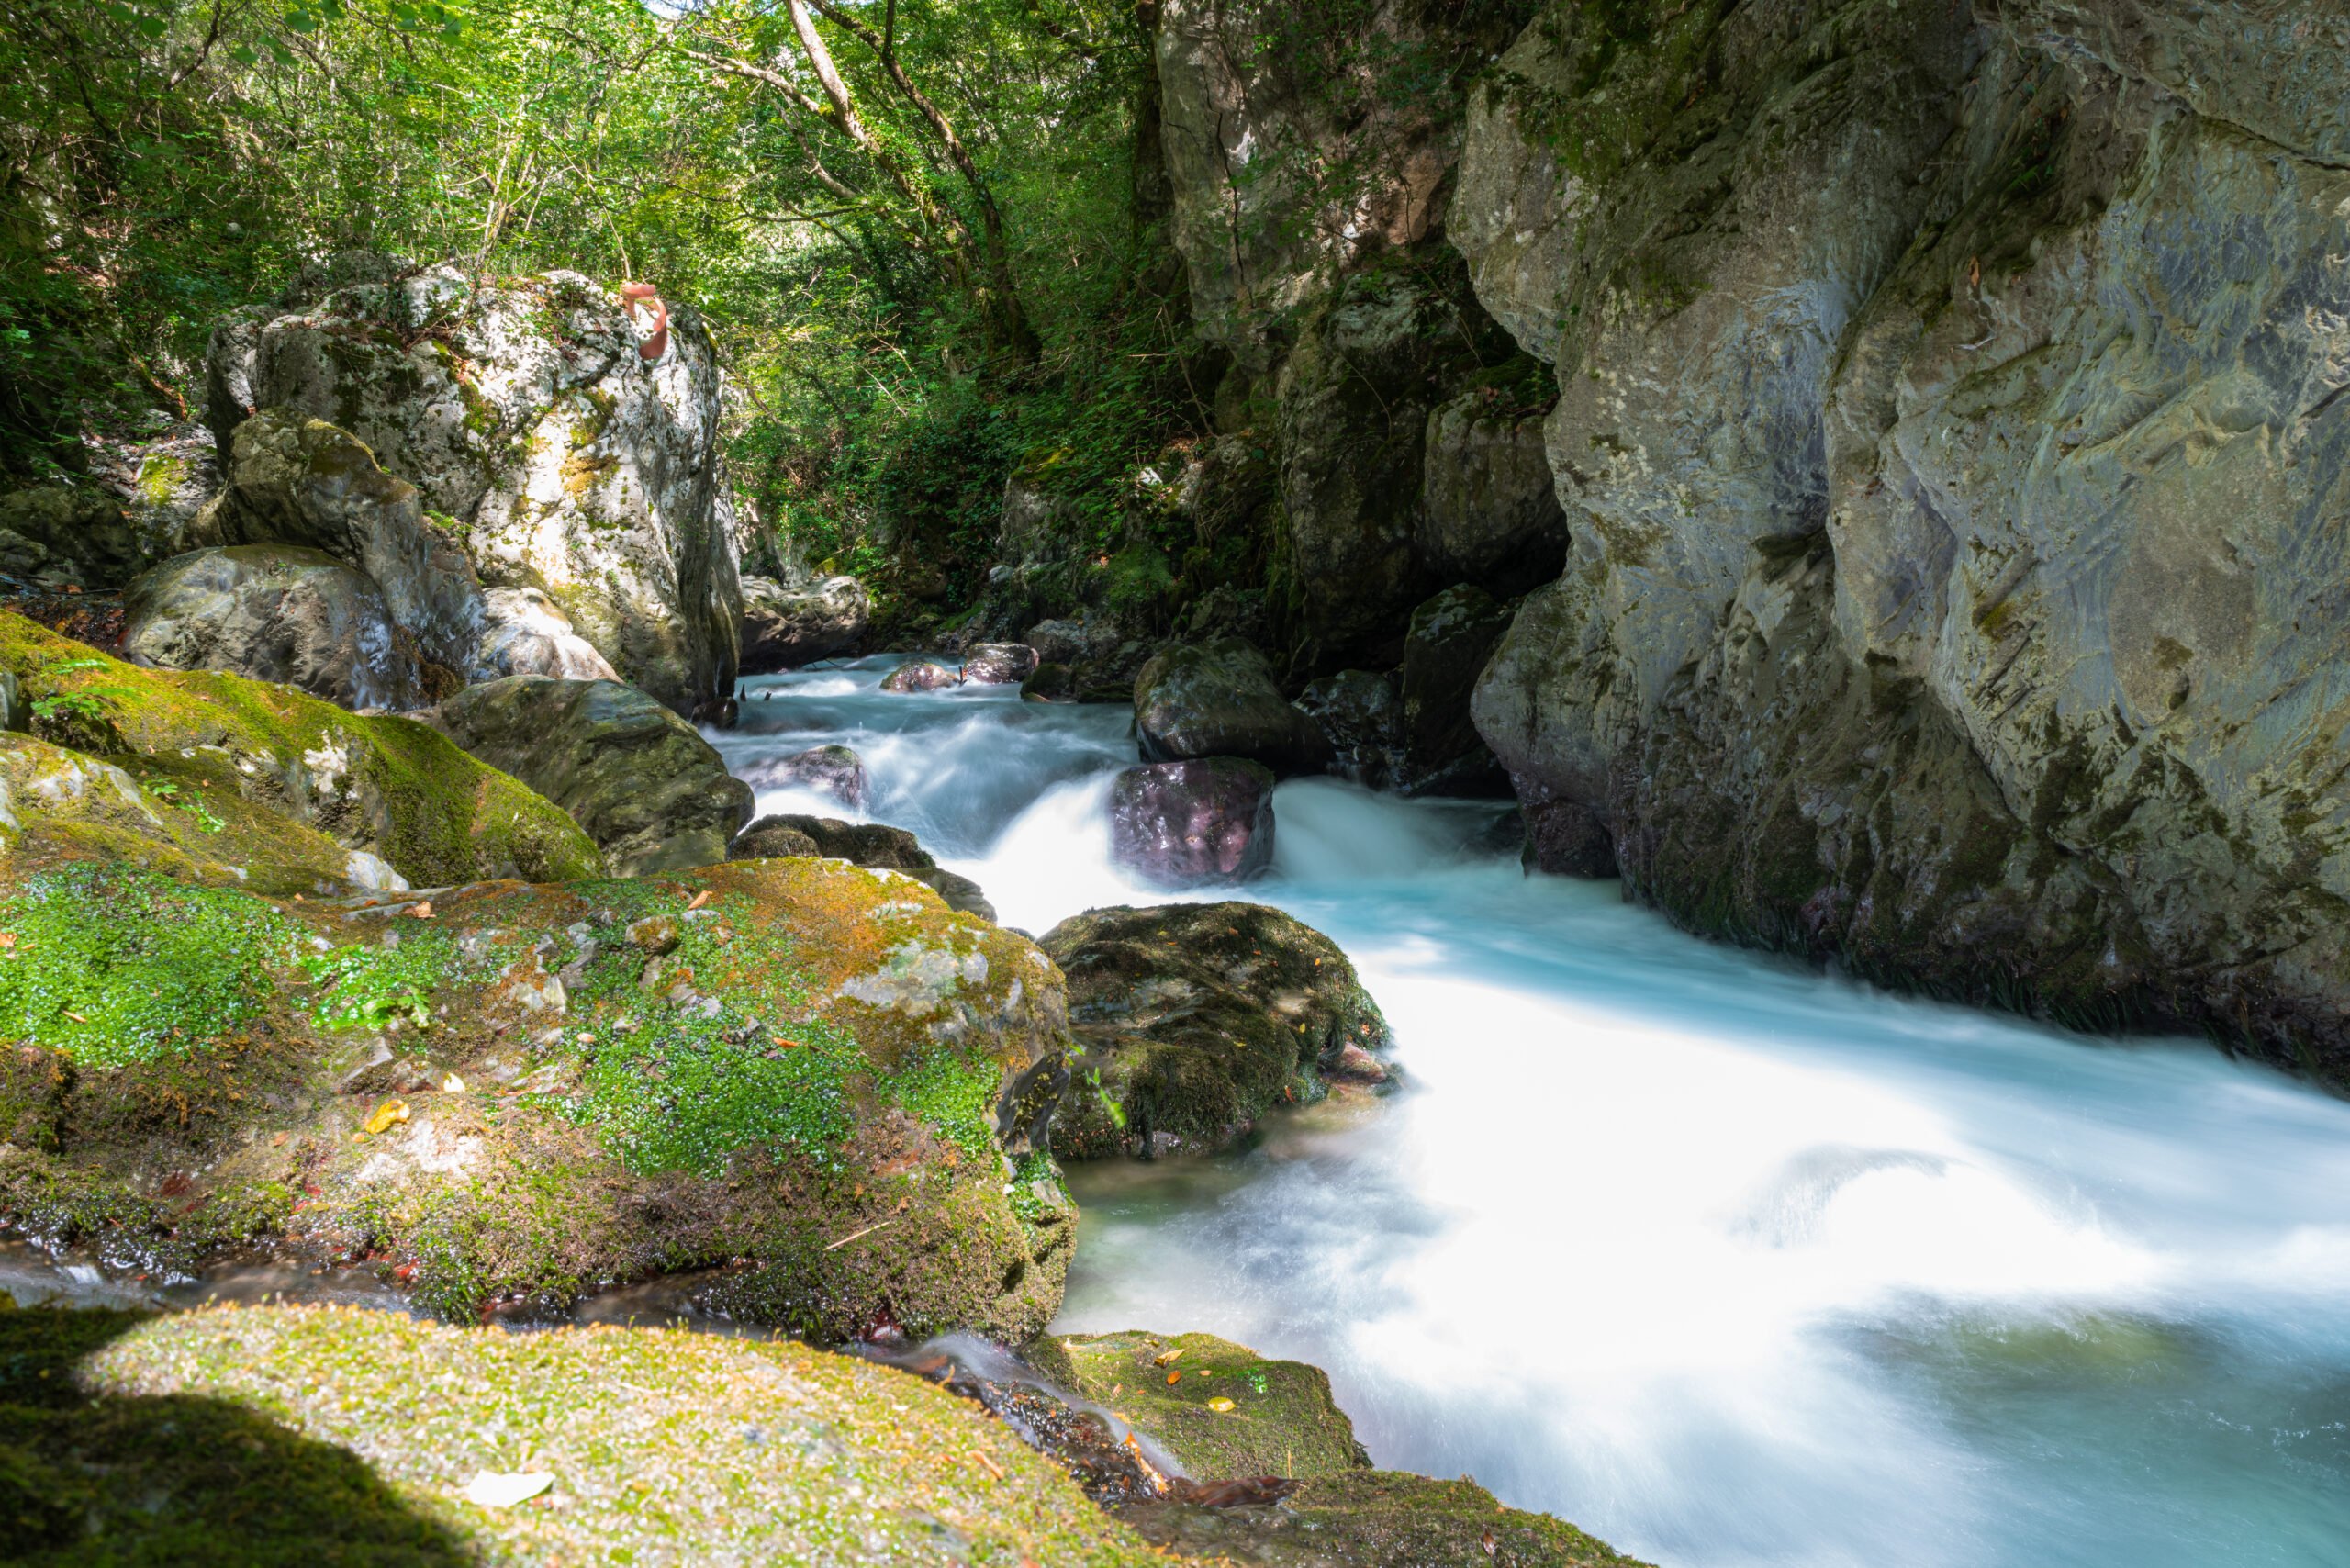 Stroll Along The River Banks Of Lousios River On The Lousios Gorge Hiking Tour From Gortyn